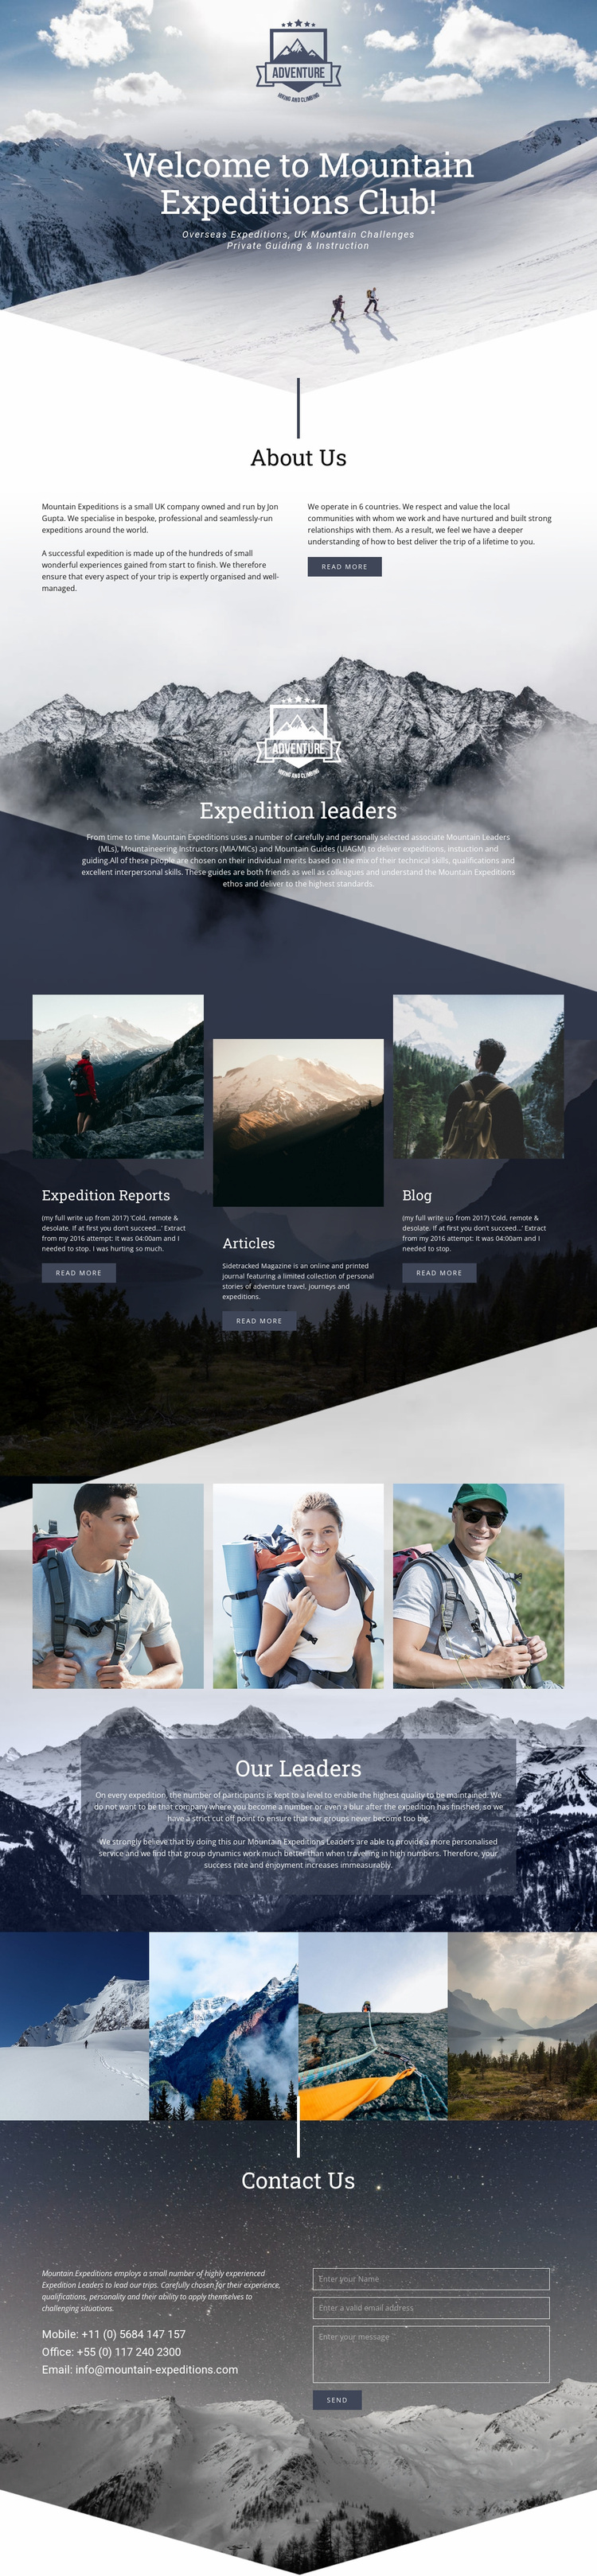 Extreme mountain expedition Website Design